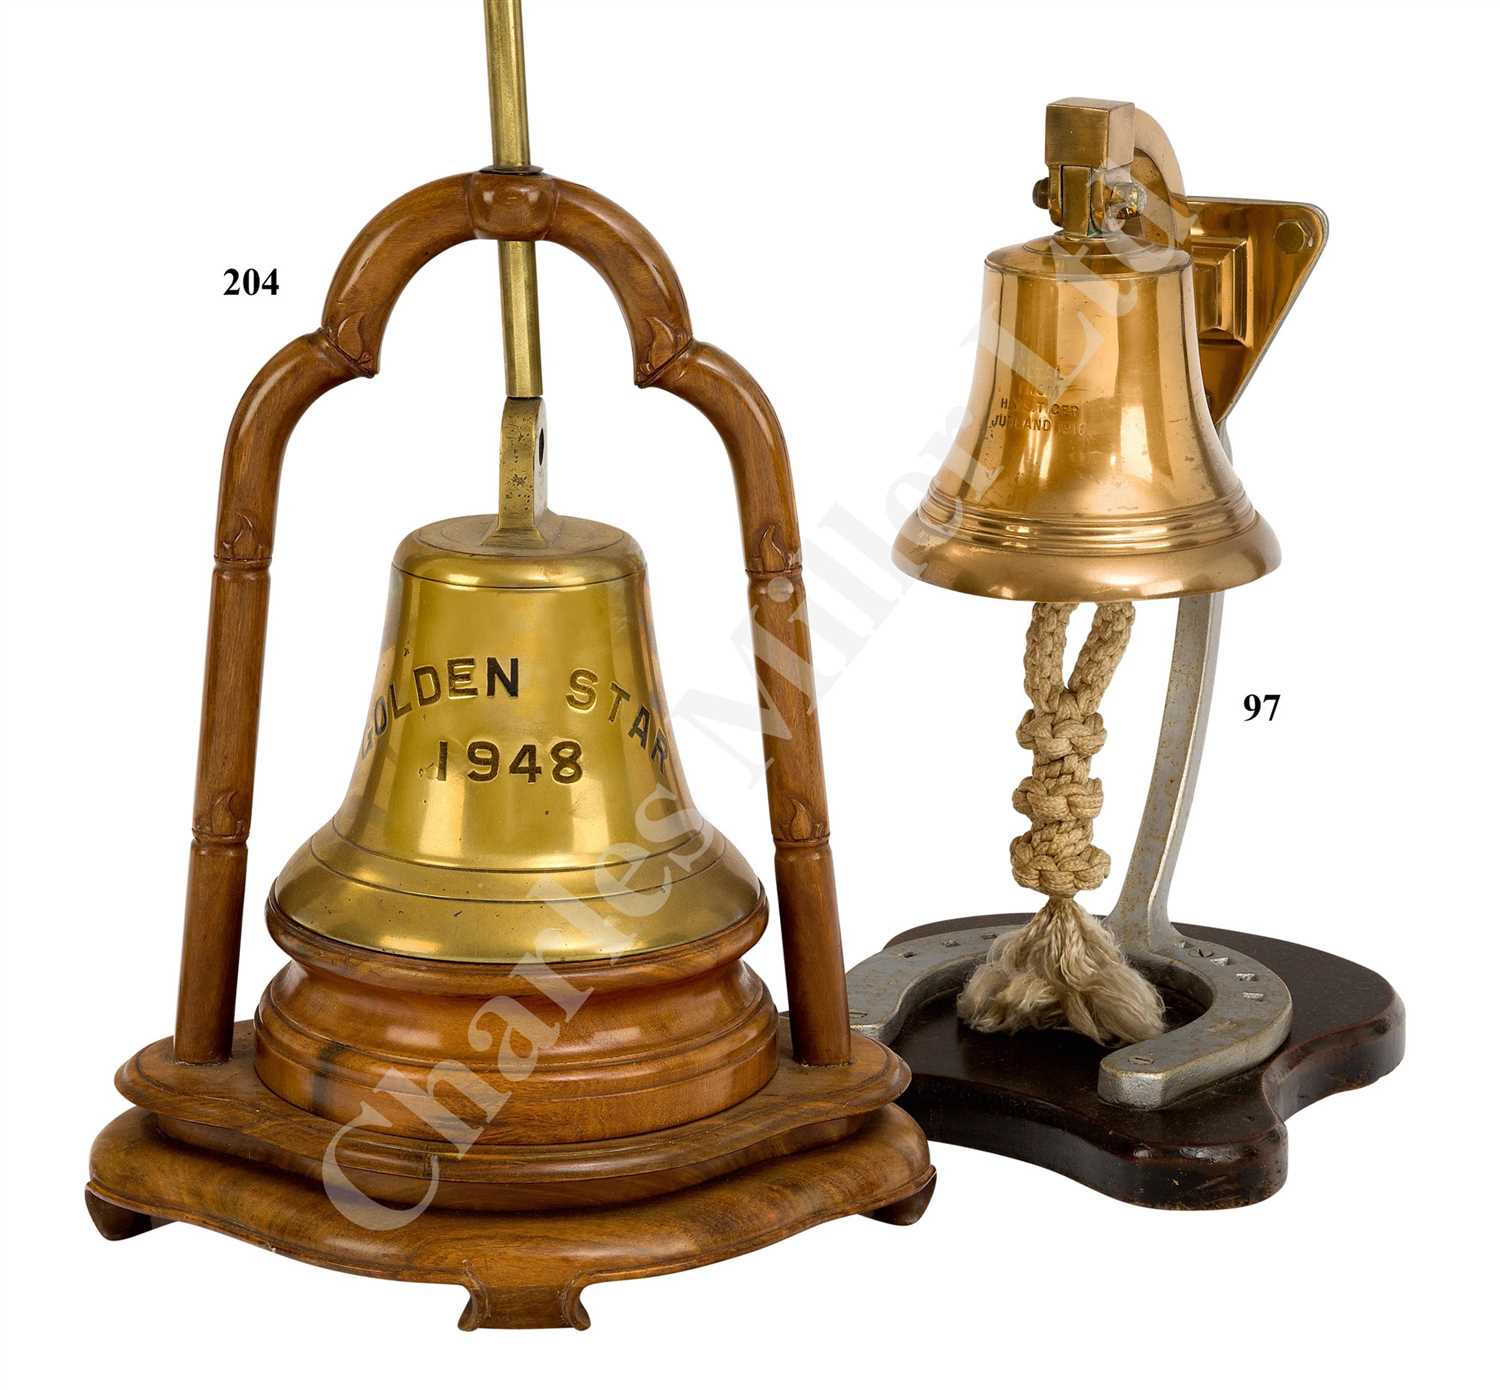 Lot 97 - A BELL MADE FROM METAL OF H.M.S. TIGER (1914), CIRCA 1932